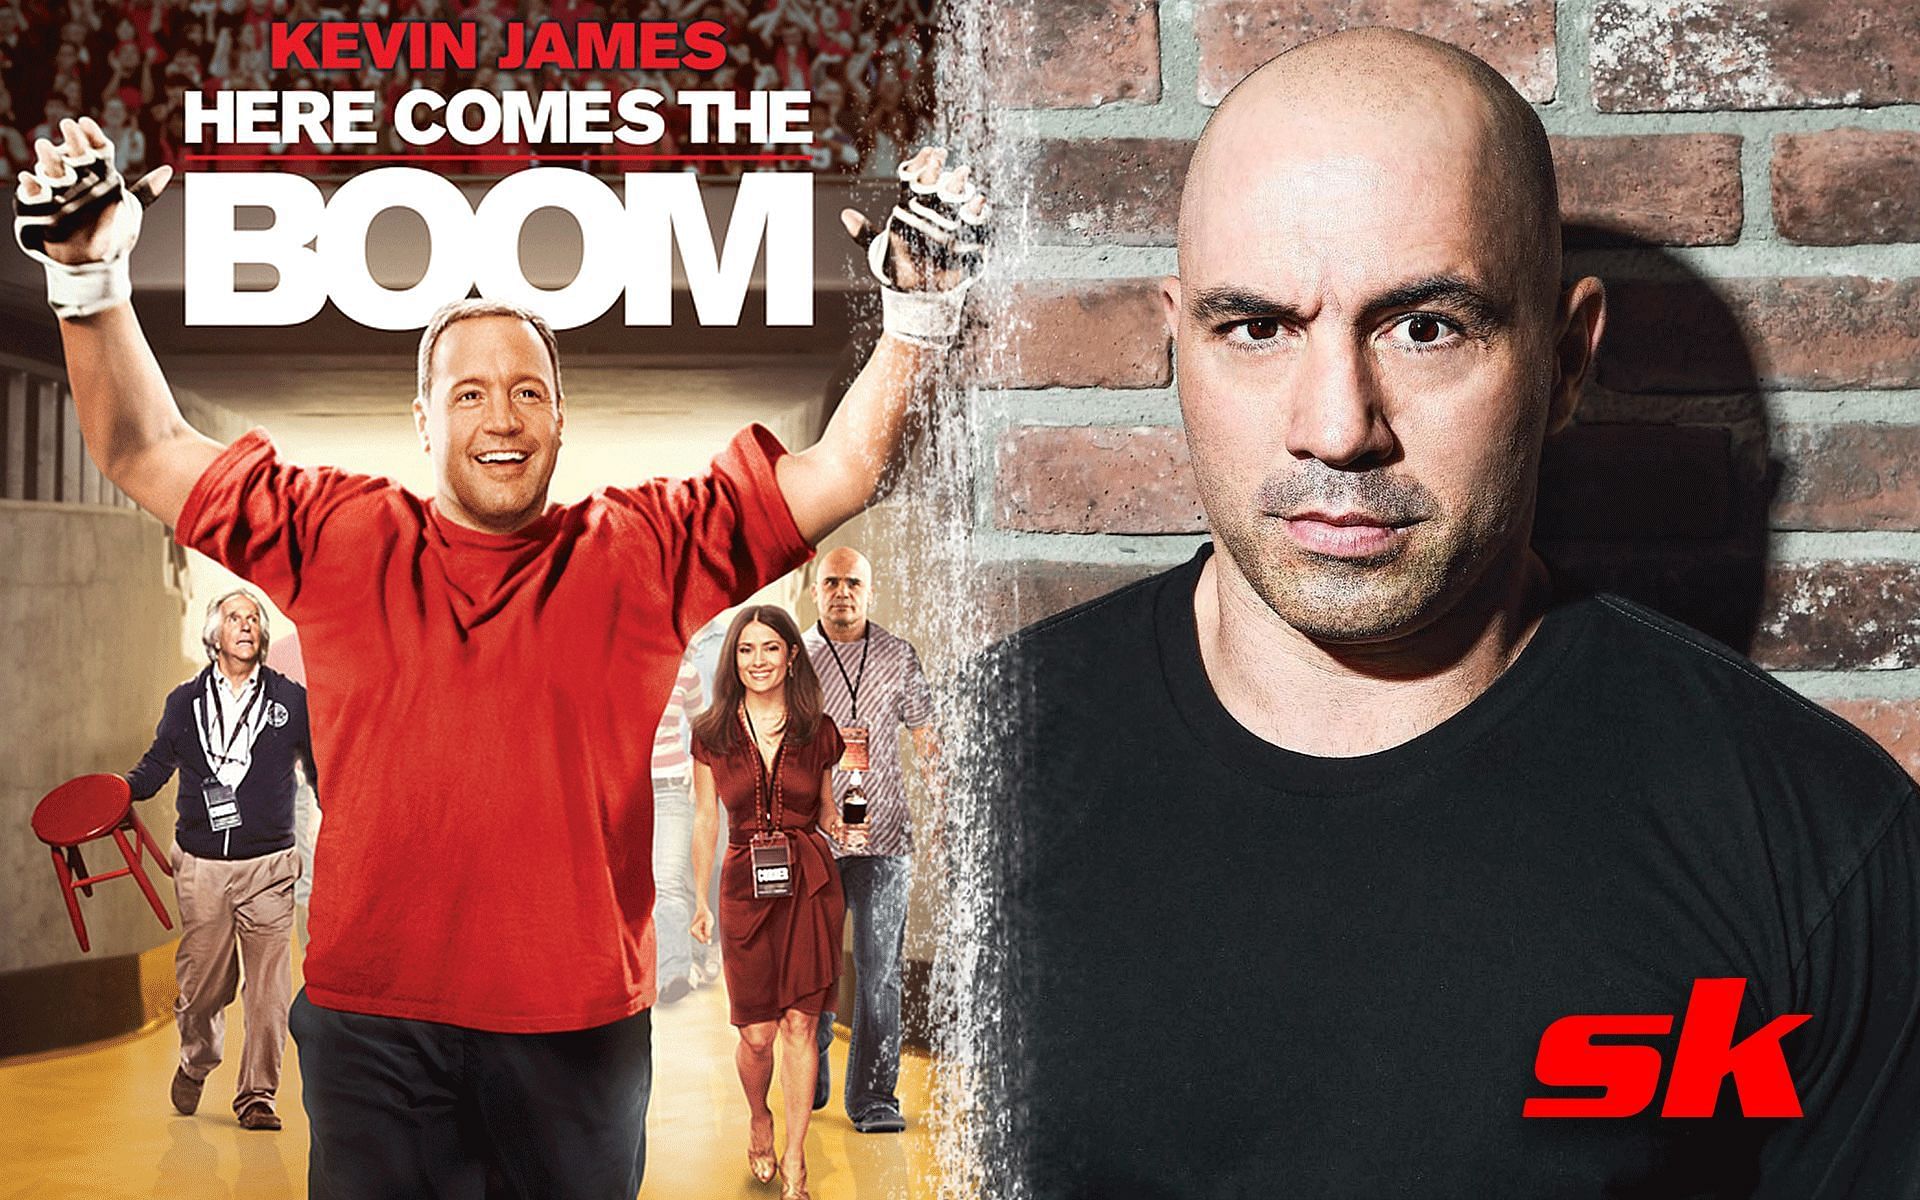 Here Comes the Boom poster (left) Joe Rogan (right) (image courtesy @sonypictures.com)